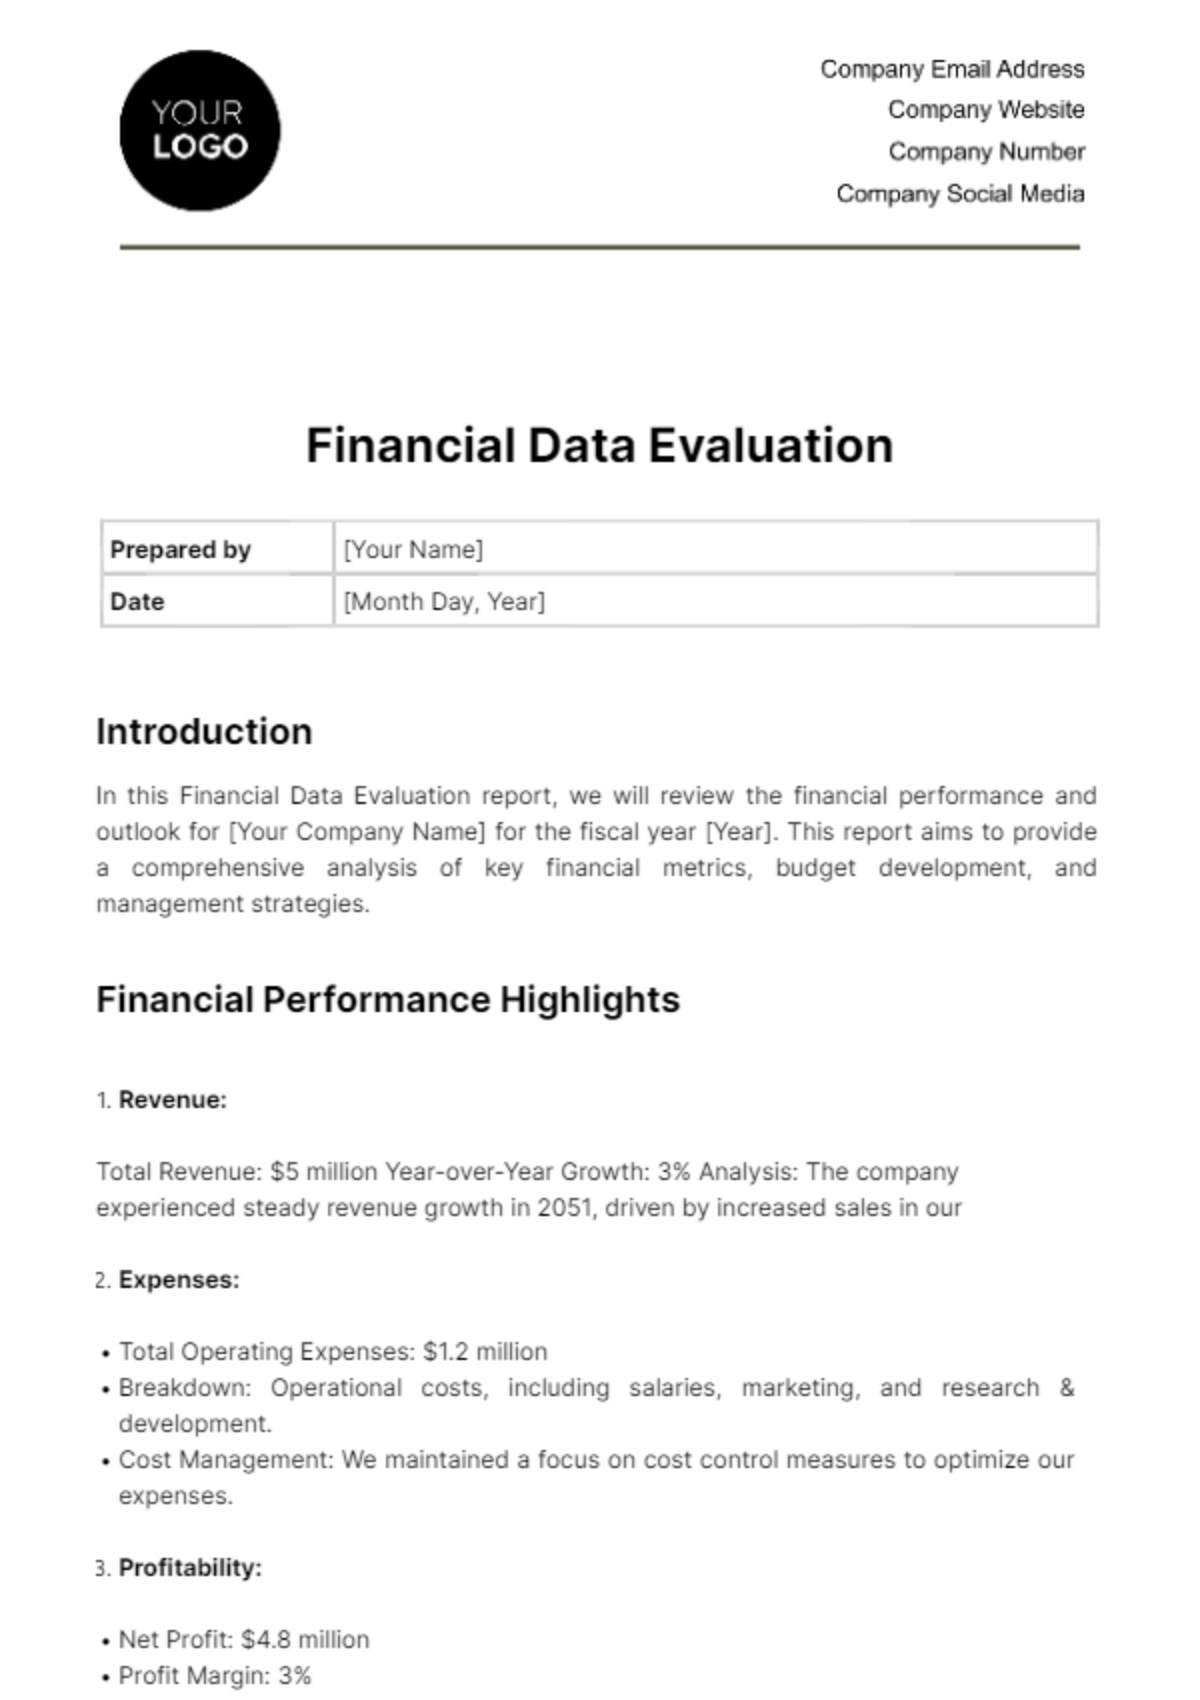 Financial Data Evaluation Template